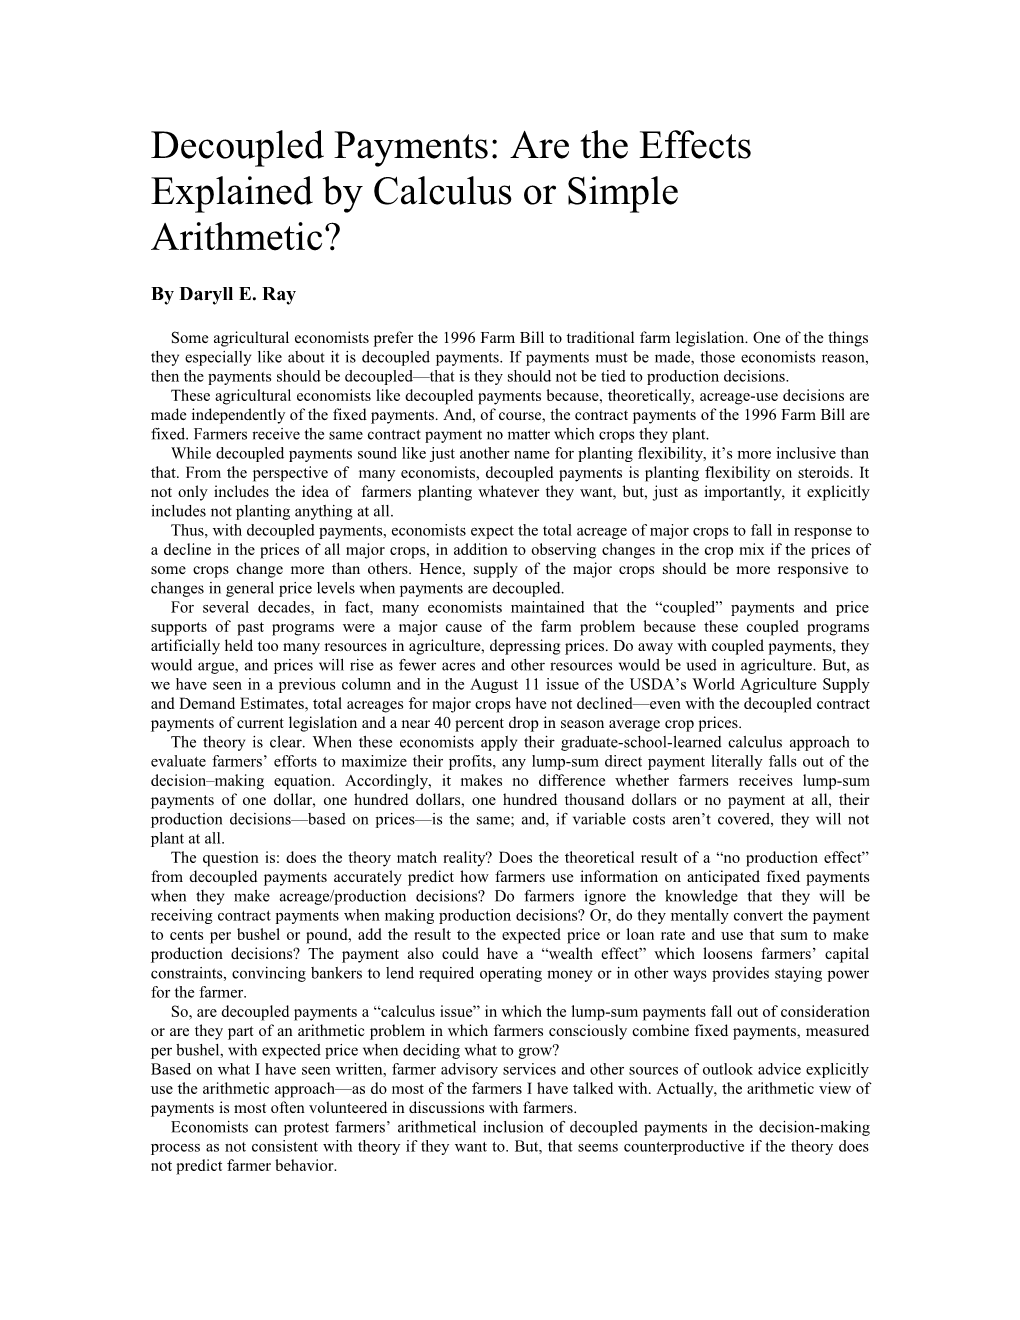 Decoupled Payments: Are the Effects Explained by Calculus Or Simple Arithmetic